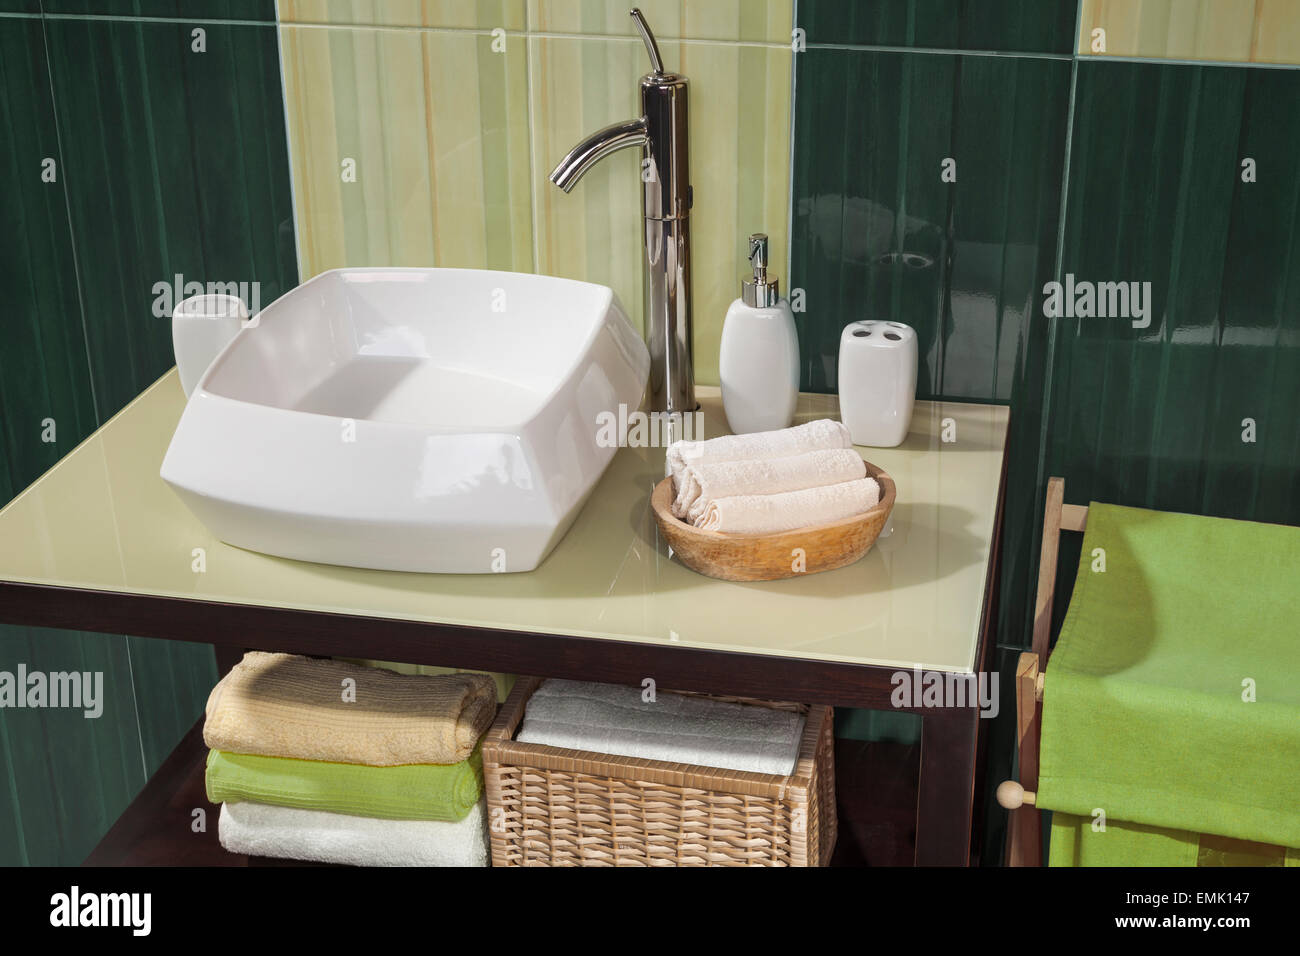 detail of a modern bathroom with sink and accessories, bathroom cabinet and green bathroom tiles Stock Photo